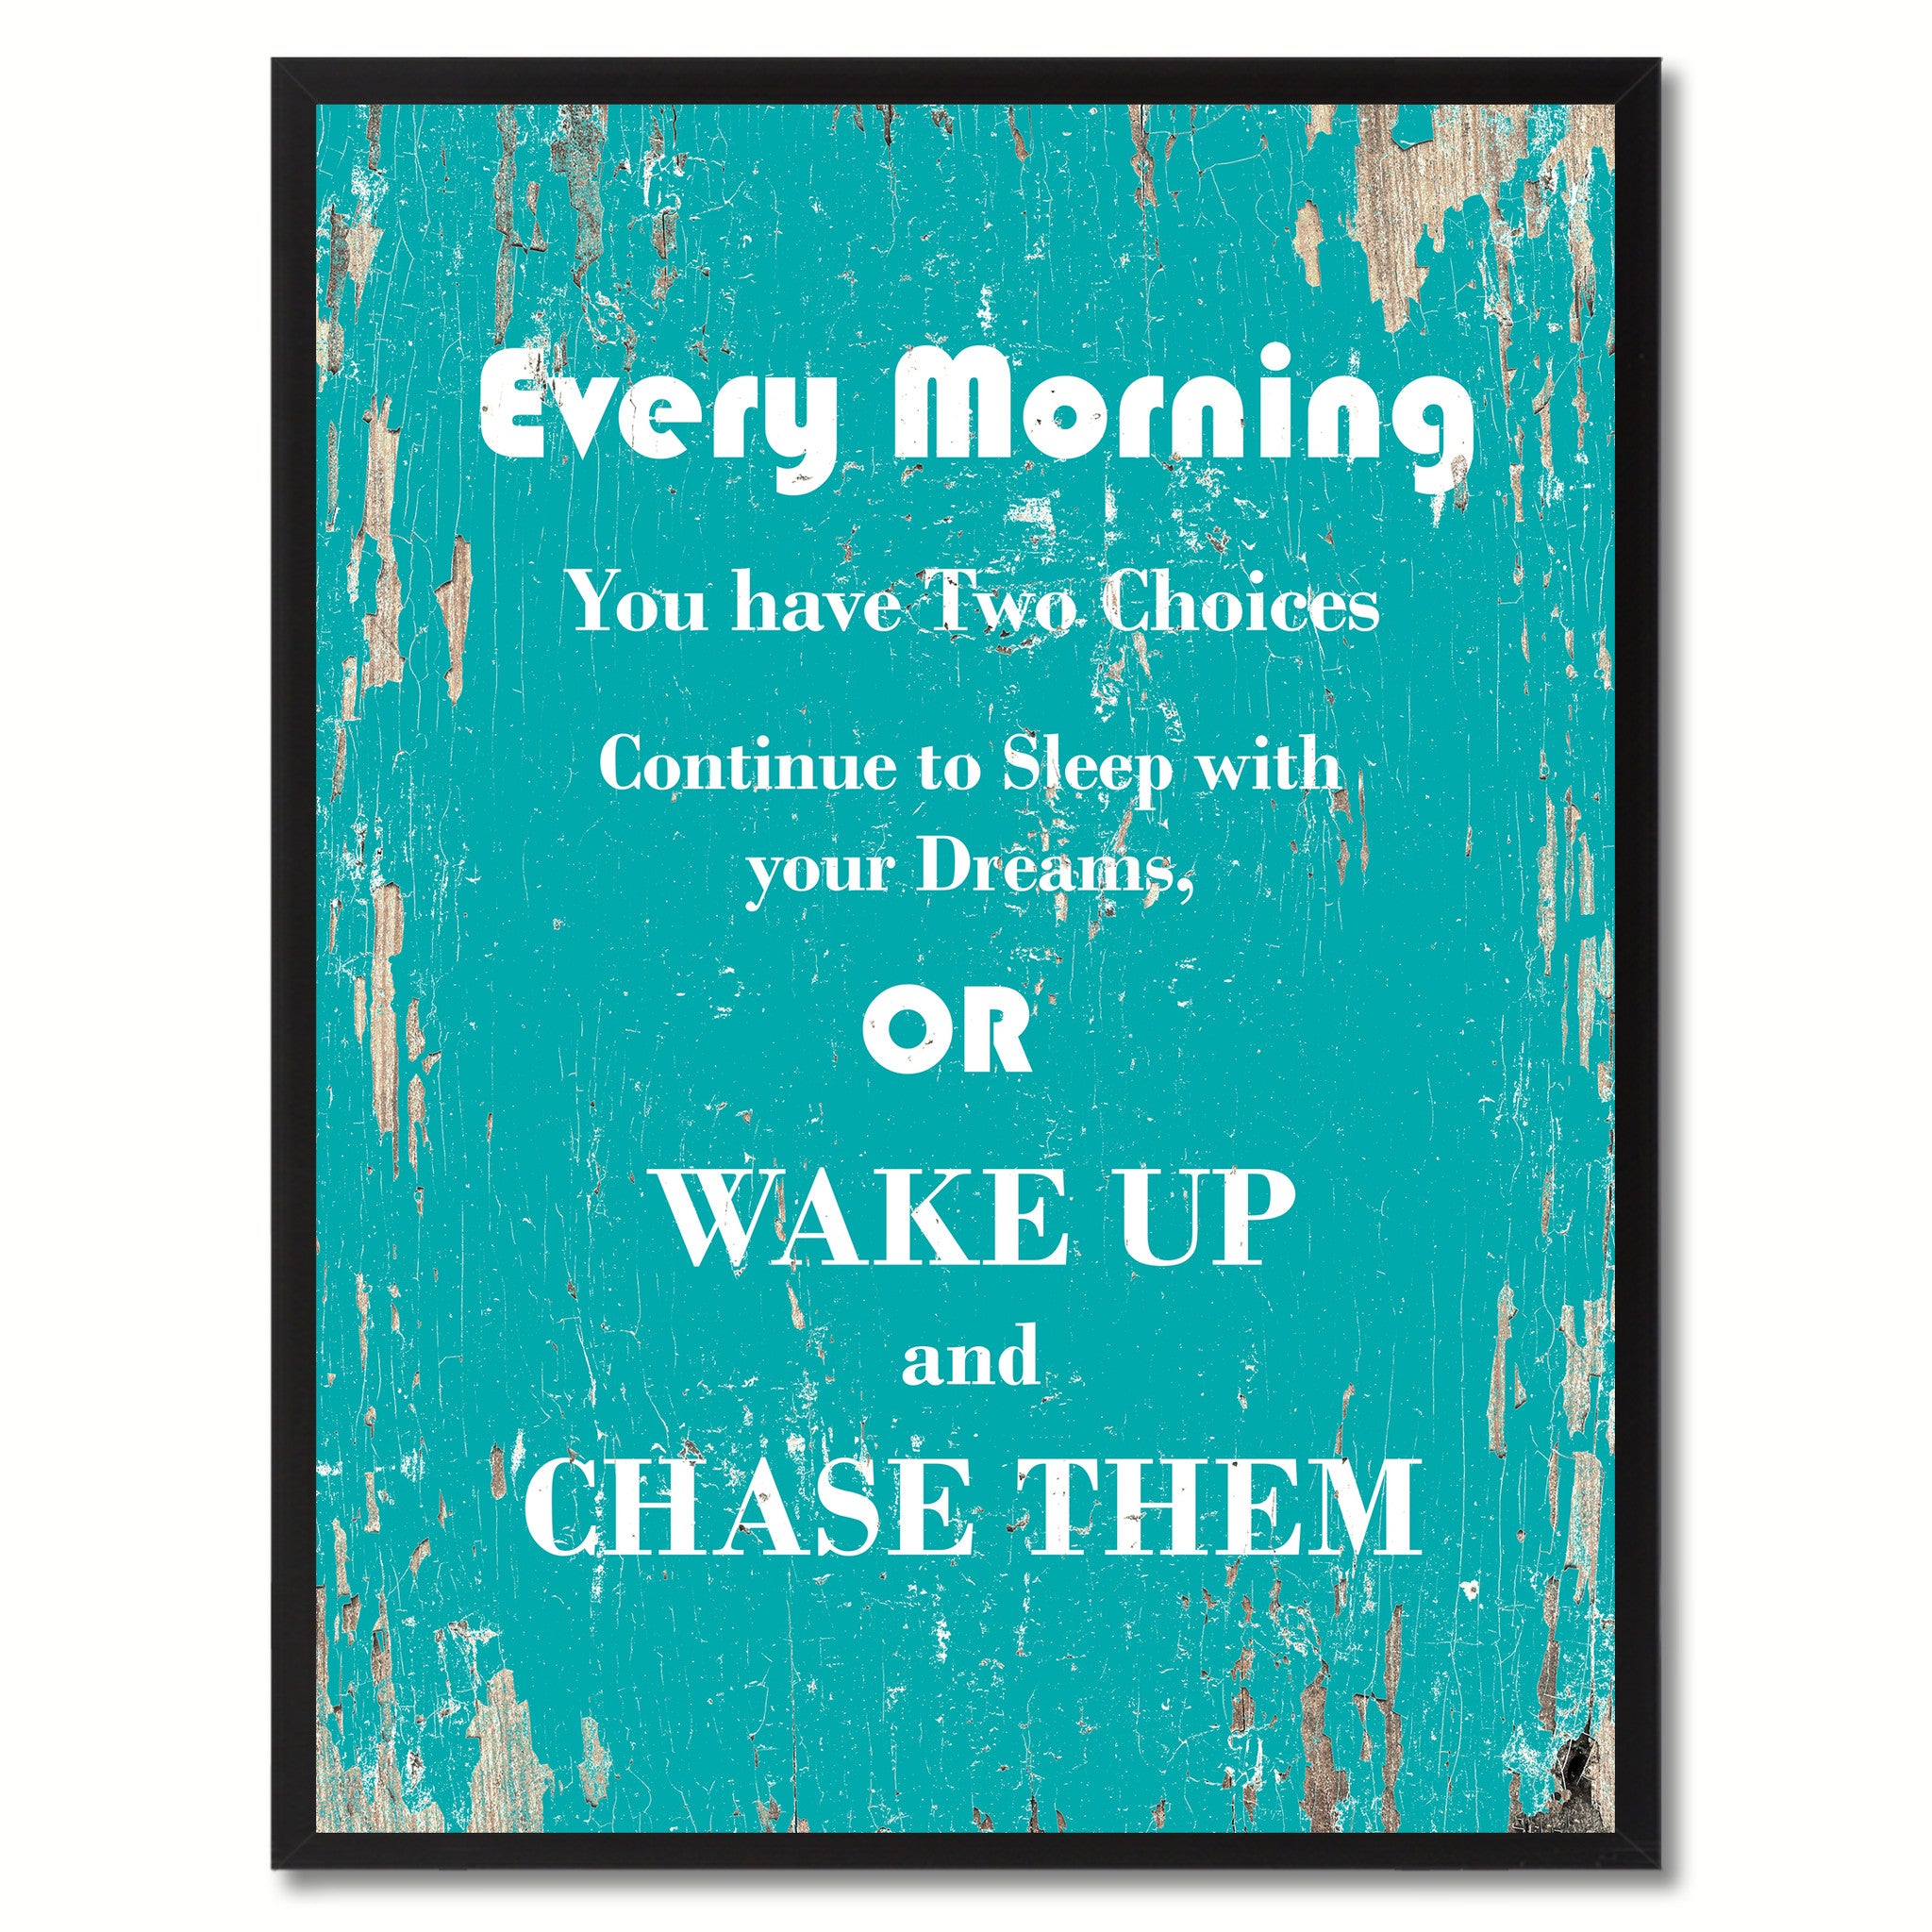 Every morning you have two choices continue to sleep with your dream or wake up & chase them Wisdom Quote Saying Home Decor Wall Art Gift Ideas